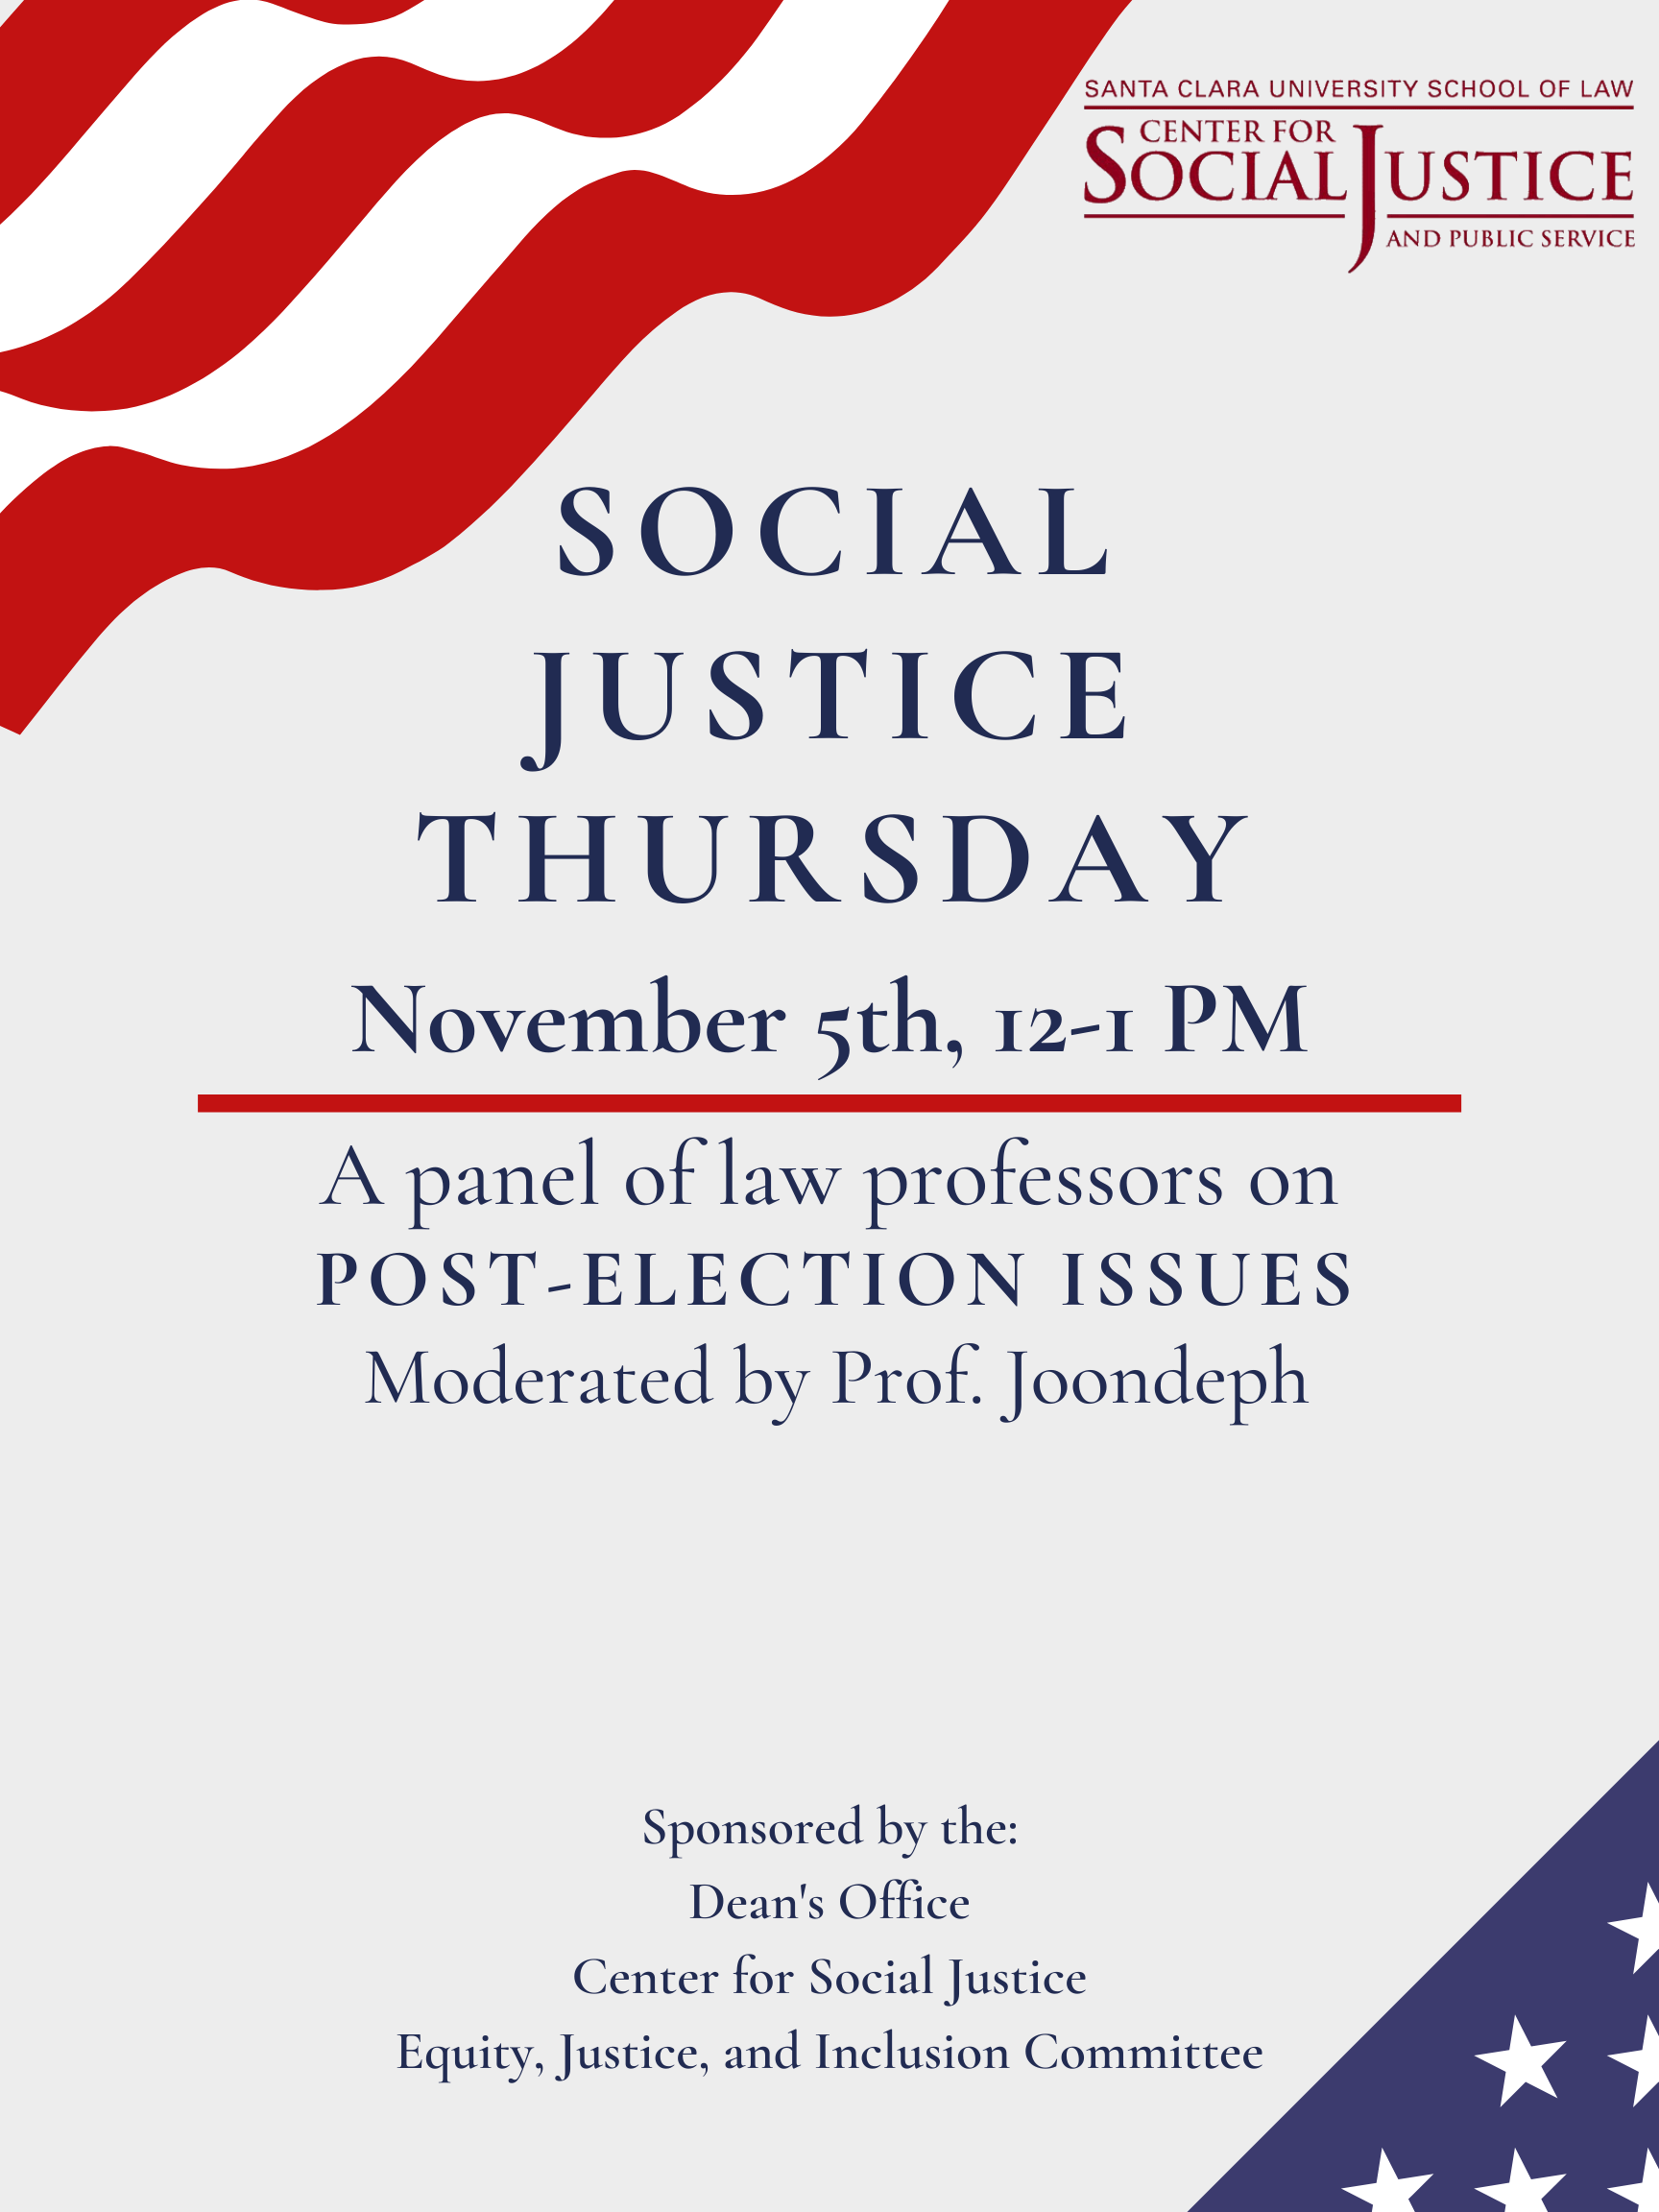 Social Justice Thursday panel on election issues